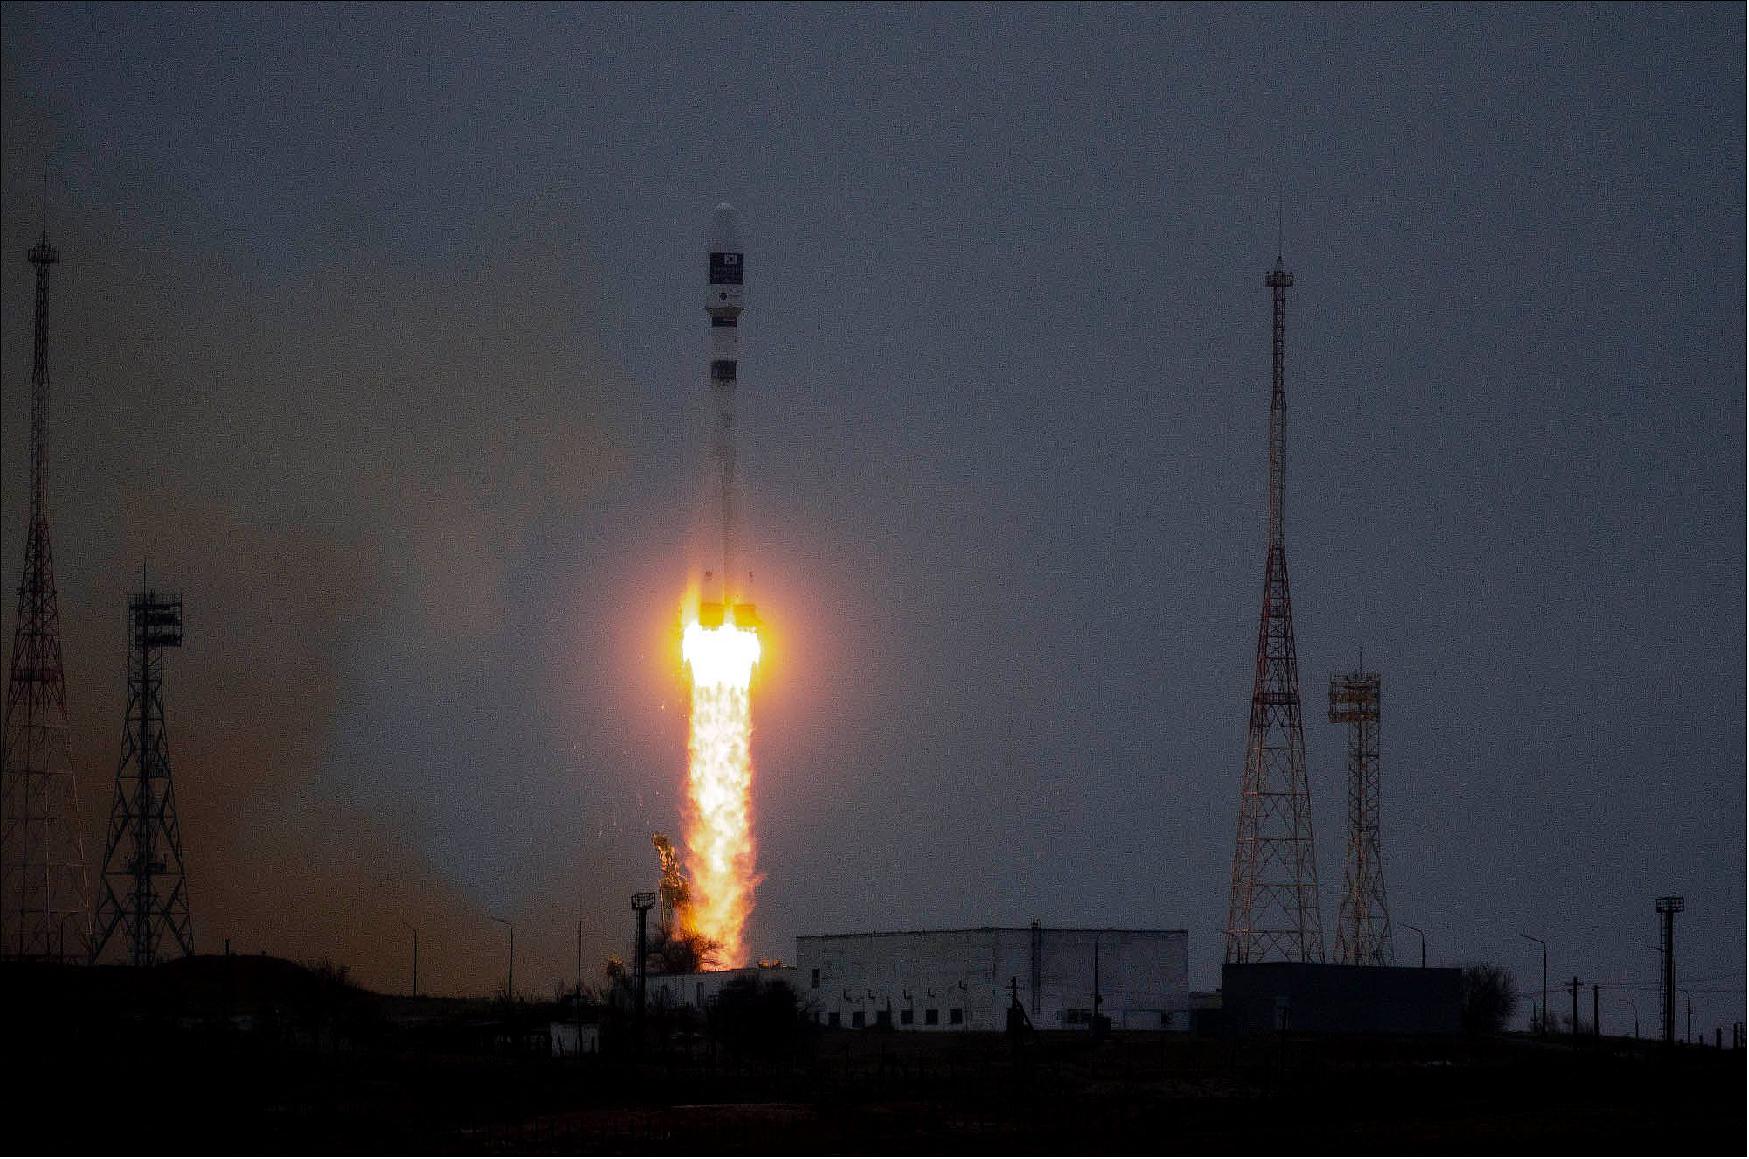 Figure 12: A Soyuz-2.1a rocket lofted the Astroscale ELSA-d mission and 37 other small satellites on 22 March 2021 into orbit (image credit: GK Launch Services)